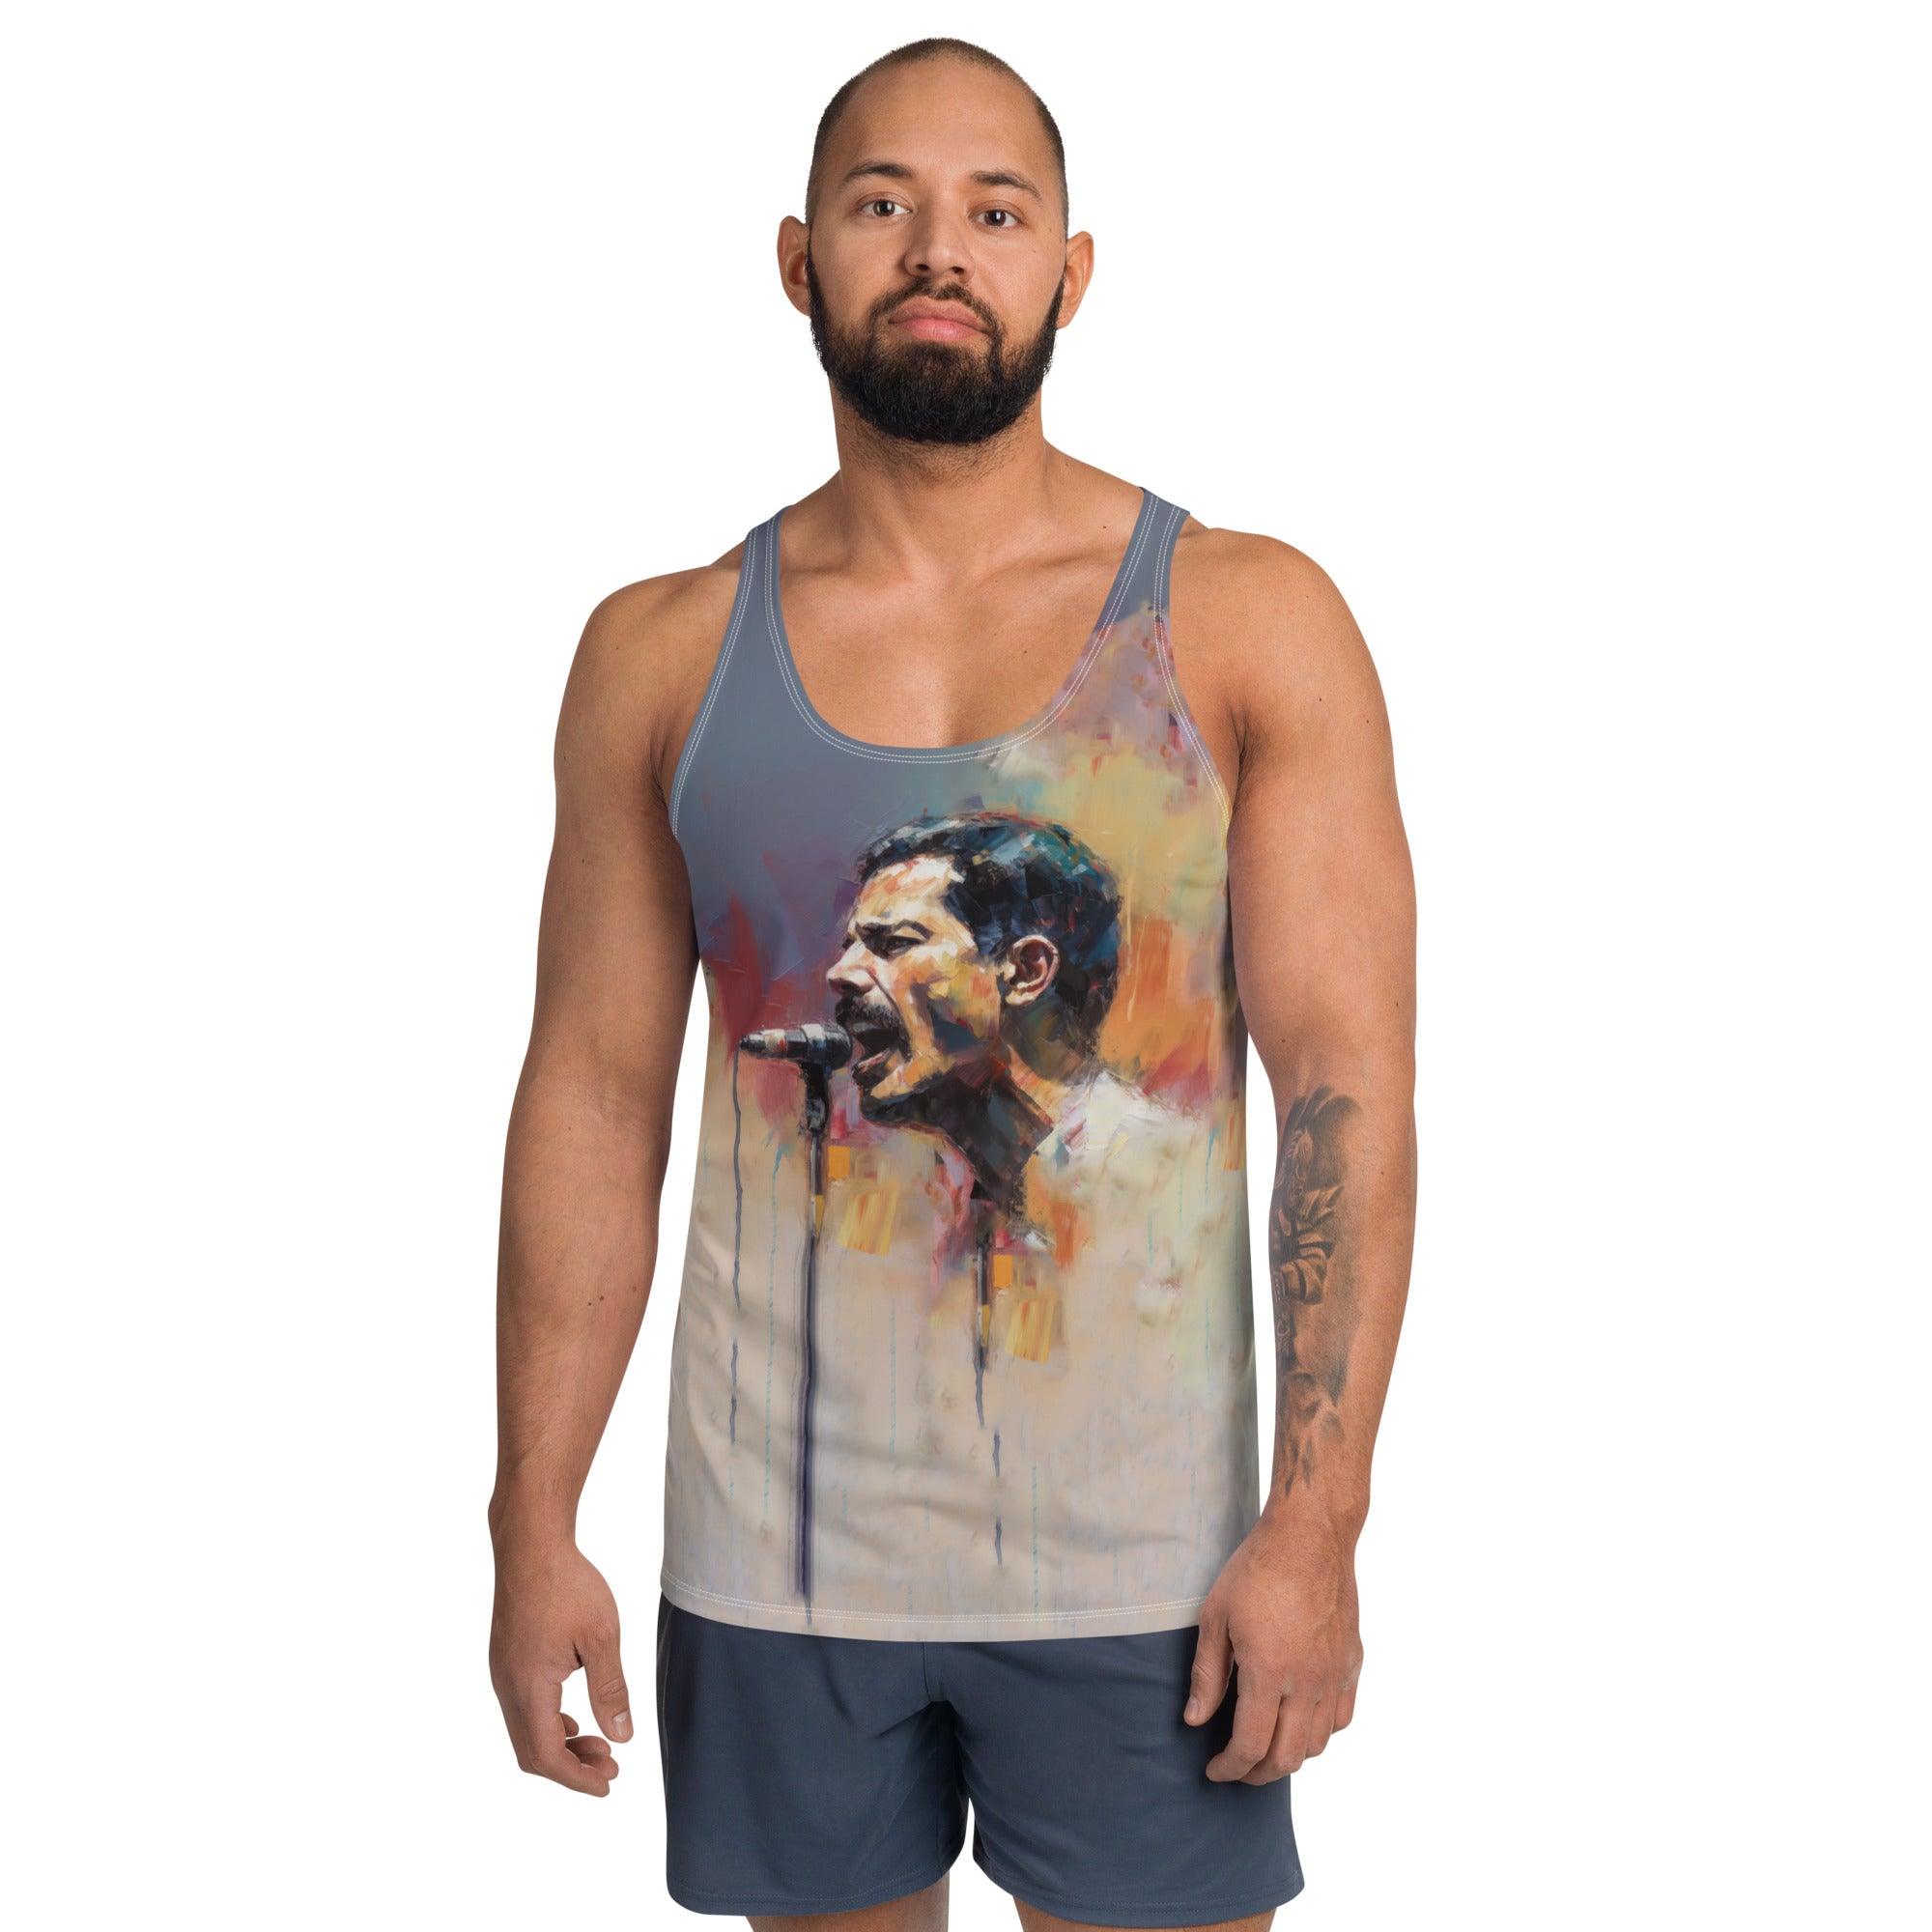 Harmony Haven Men's tank top in a casual setting.